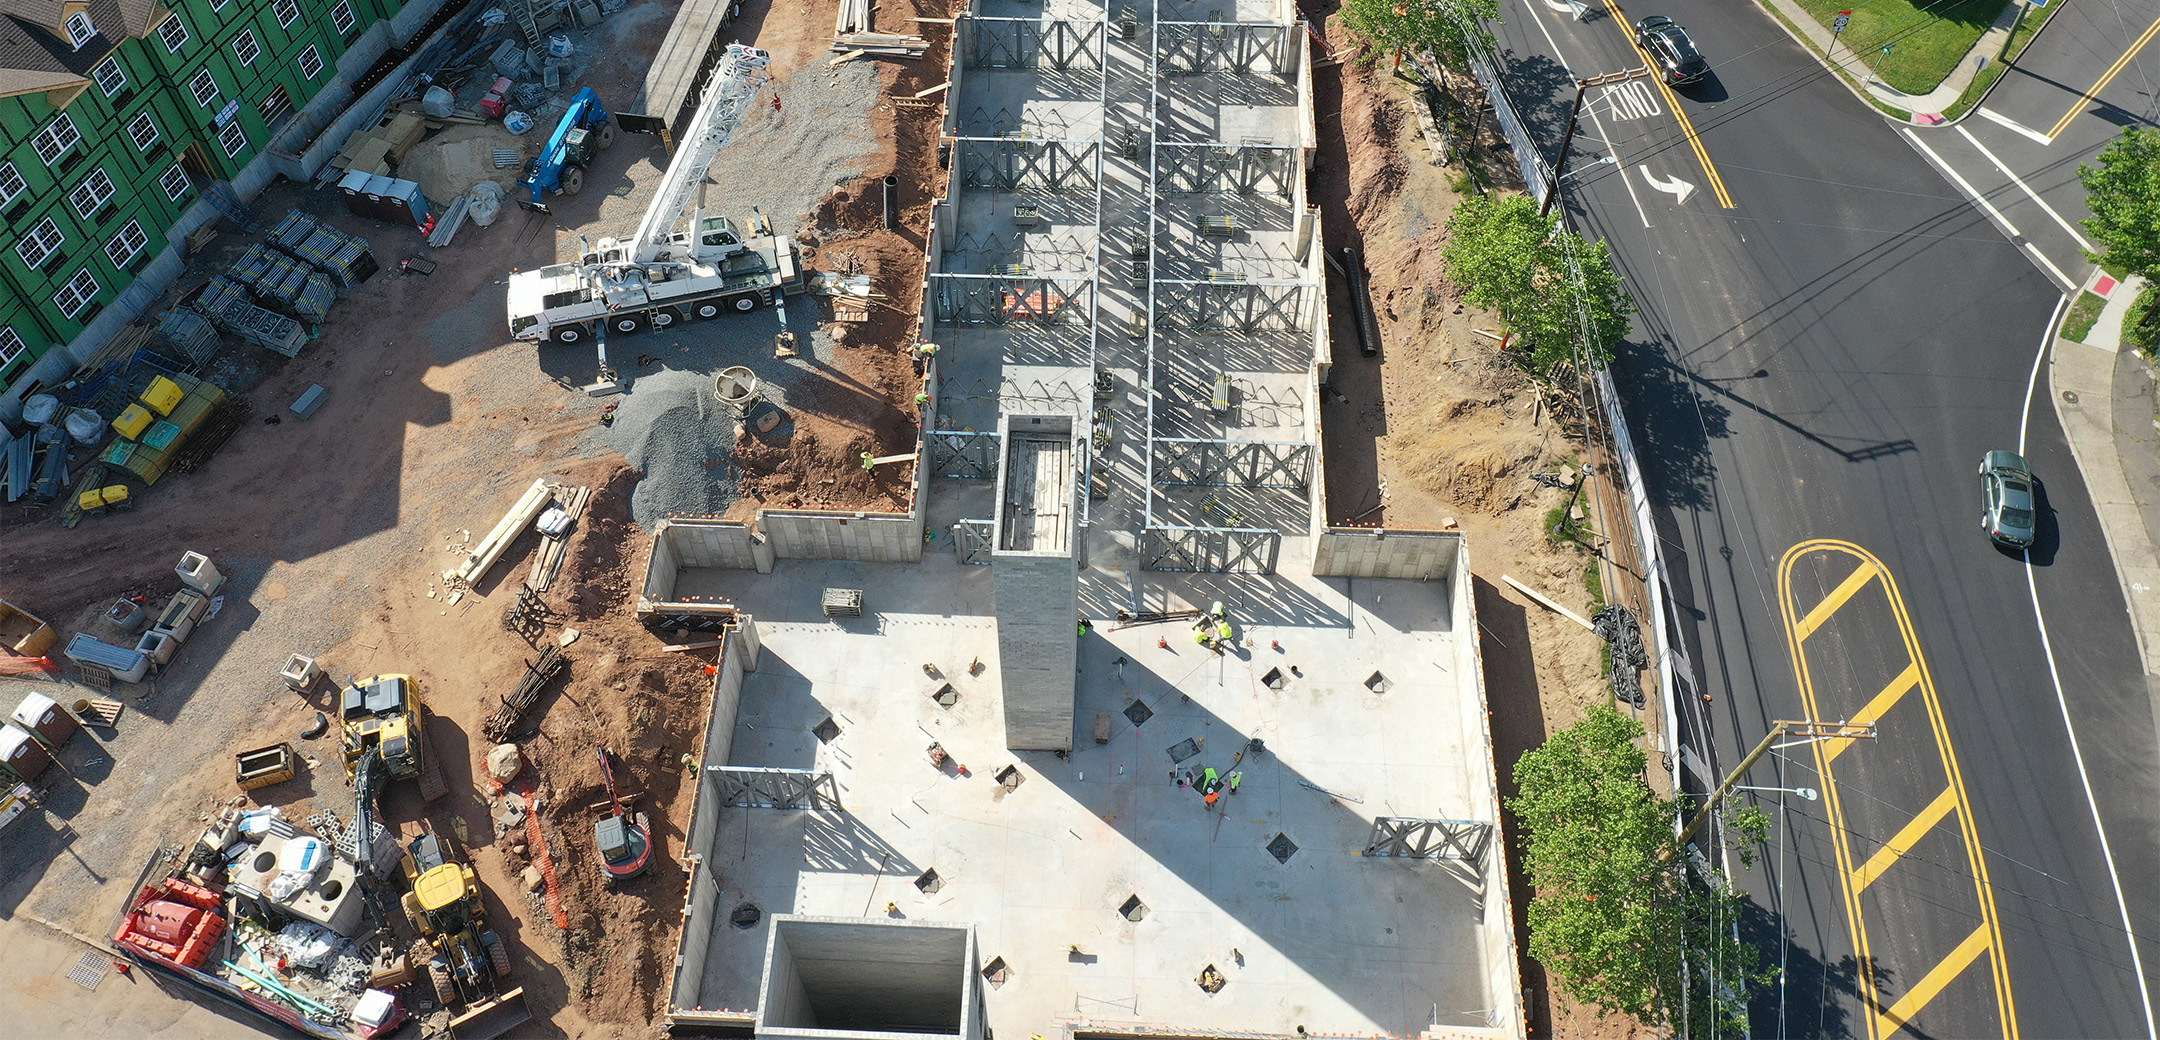 The aerial view looking down at one of the Chelsea Senior Living buildings under construction with cement.